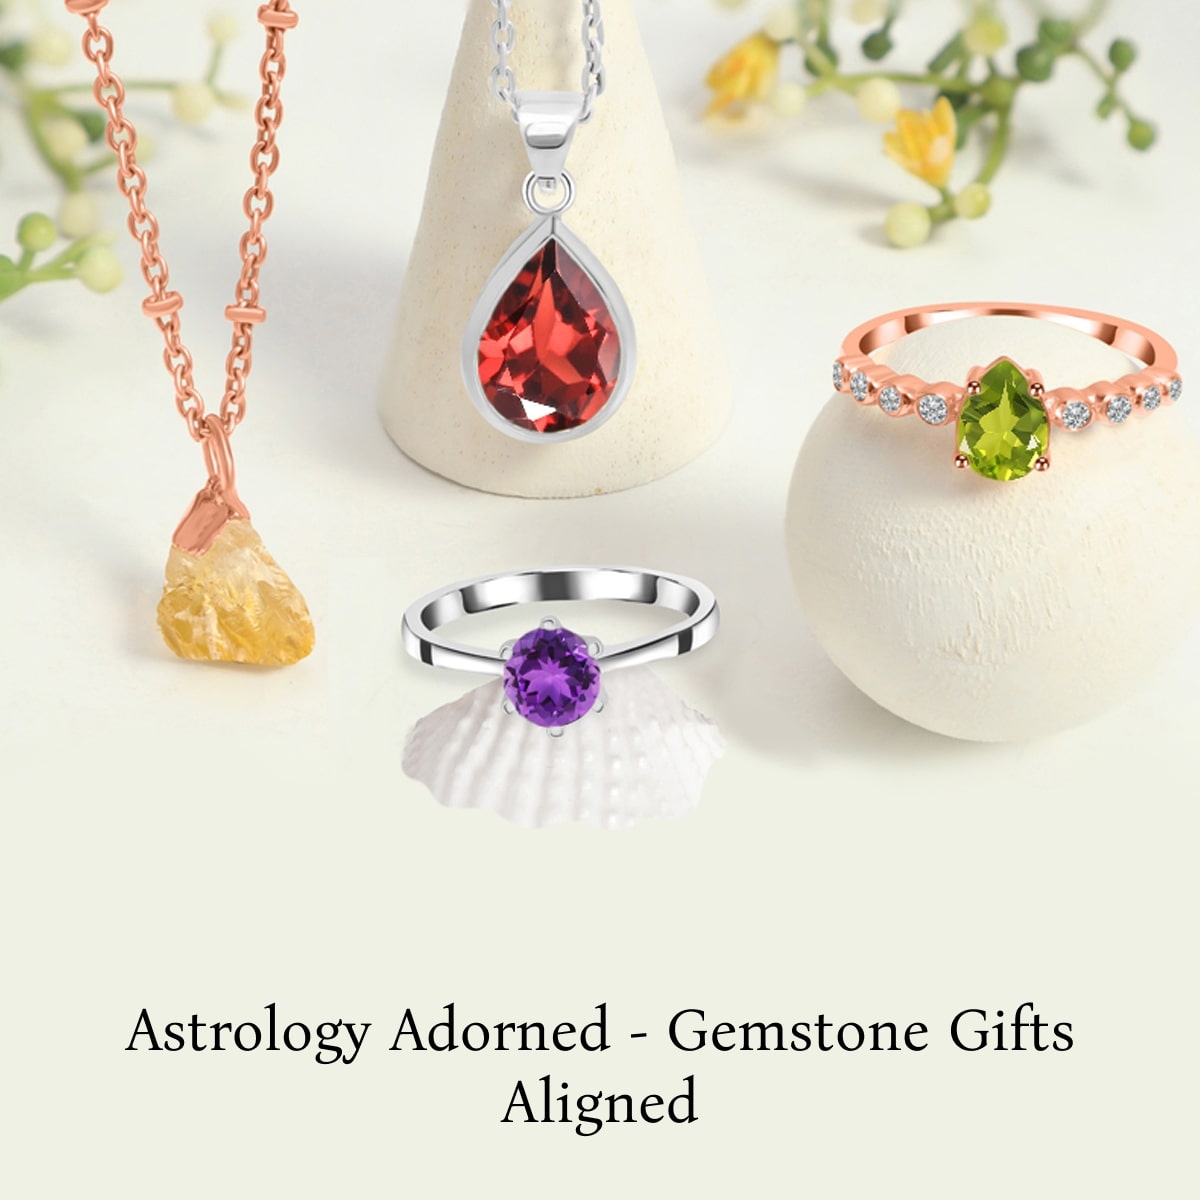 Gemstone Gifts for Every Zodiac Sign